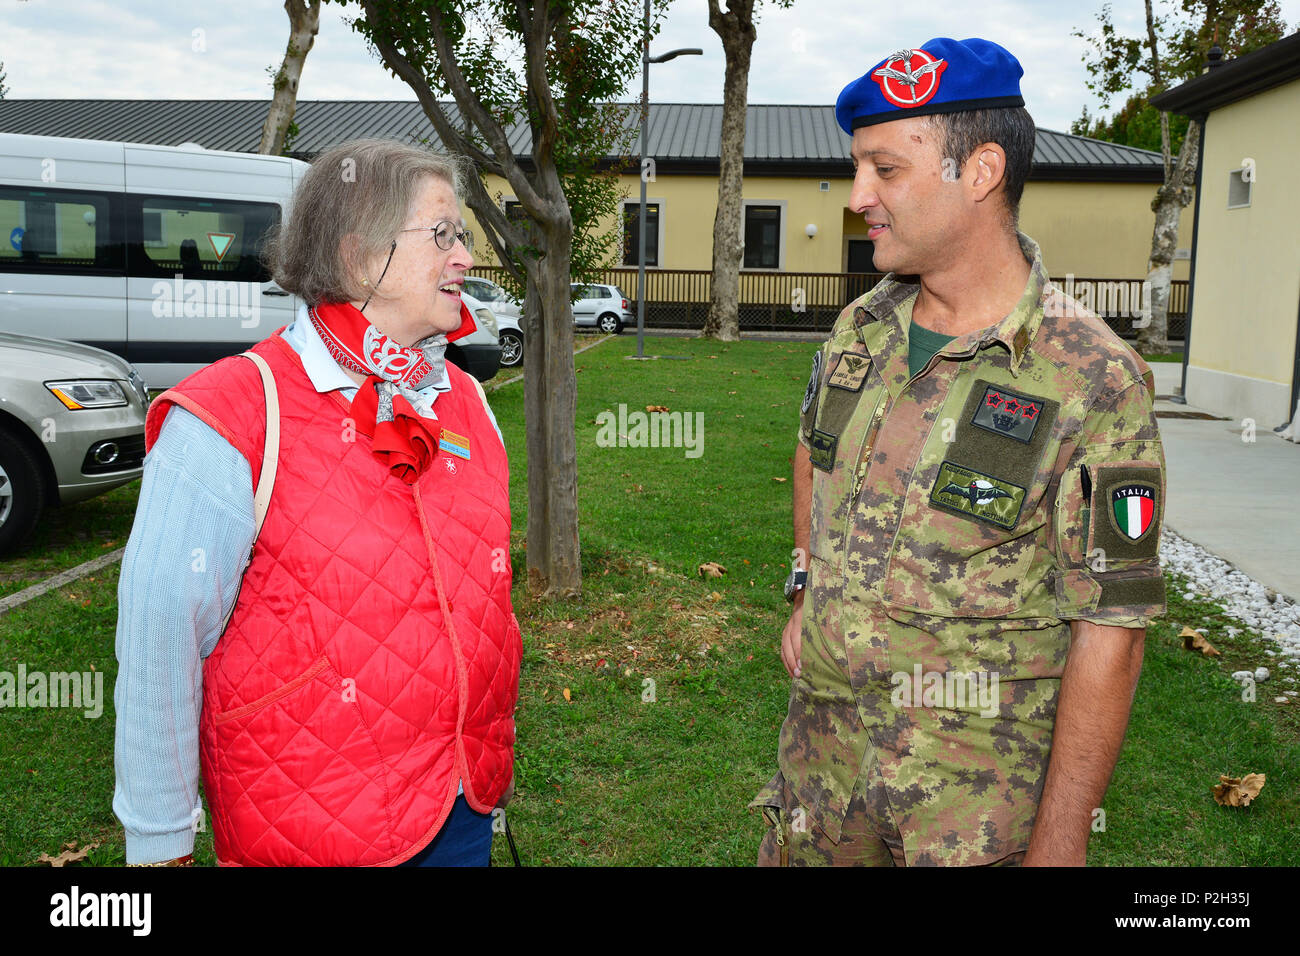 Ms. Maria Giulia Medolago Albani, Sovereign Military Order of Malta (left), talks with Colonel Umberto D’Andria, Italian Base Commander Caserma Ederle of Vicenza, during the visit at caserma Ederle, 22 Sept. 2016, Vicenza, Italy. The Sovereign Military Order of Malta (SMOM) or Order of Malta, is a Roman Catholic  Religious Order traditionally of military, chivalrous and noble nature for defense of Catholic faith and assistance to the poor. (U.S. Army photo by Visual Information Specialist Paolo Bovo/Released) Stock Photo